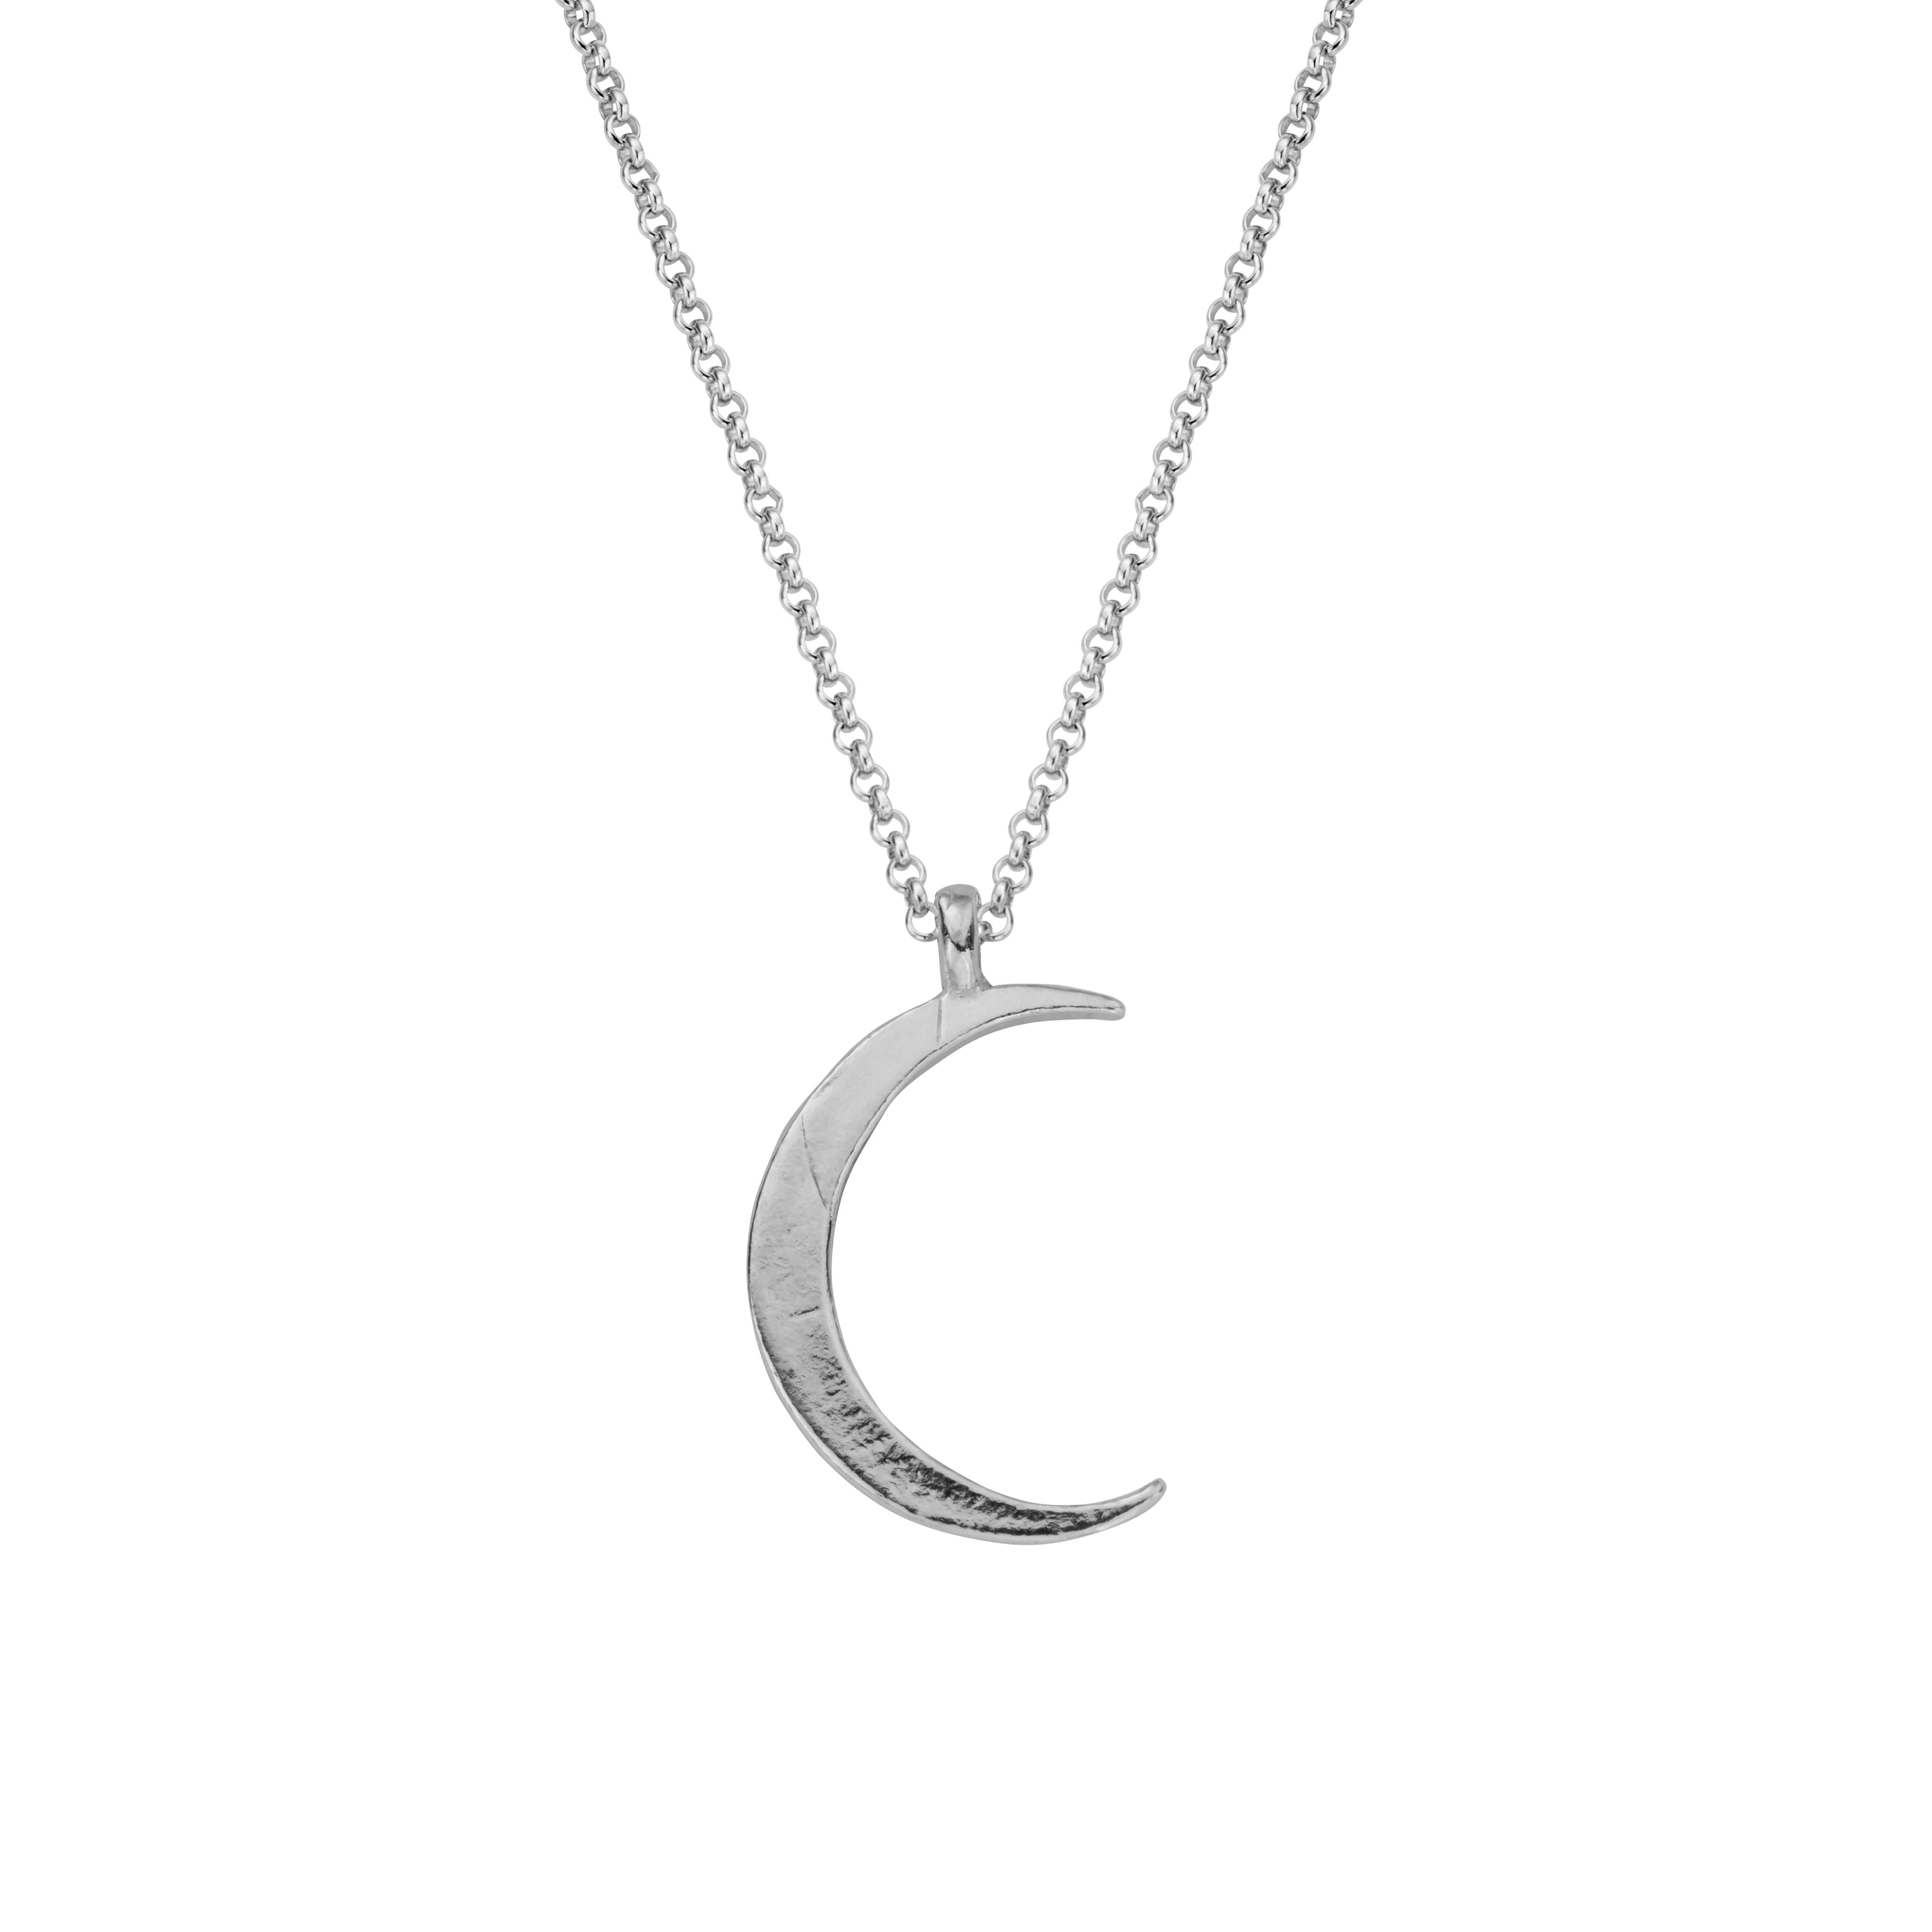 Buy Silver Crescent Moon Pendant Necklace for Women,Dainty Handmade  Hammered Waning Waxing Moon Phase Pendant Chain Minimalist Jewelry  (Waning/Waxing Moon Silver) at Amazon.in